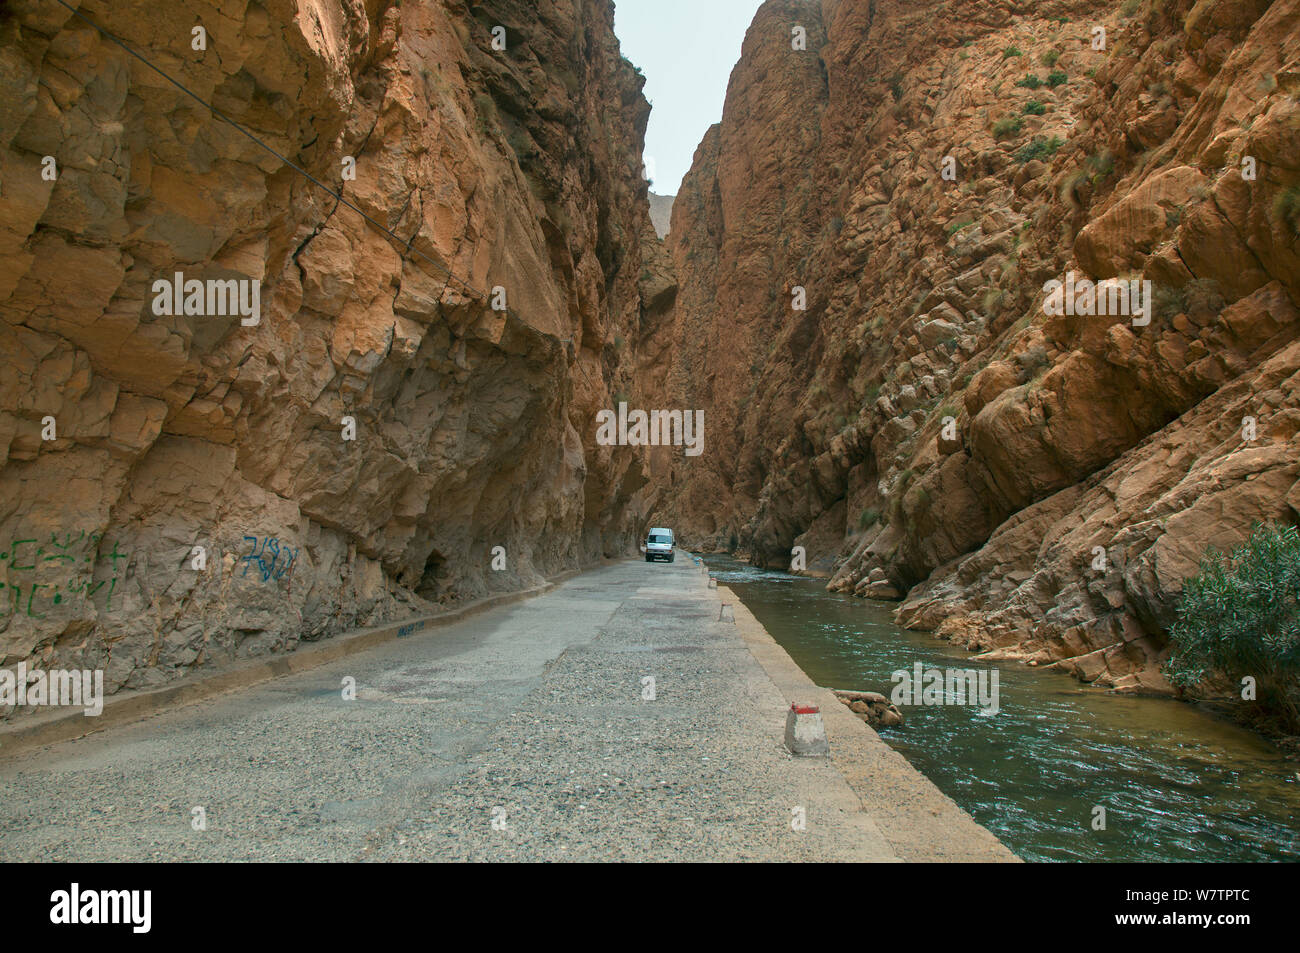 The Dades Gorge road passing between steep rock faces next to river, Morocco, March 2011. Stock Photo